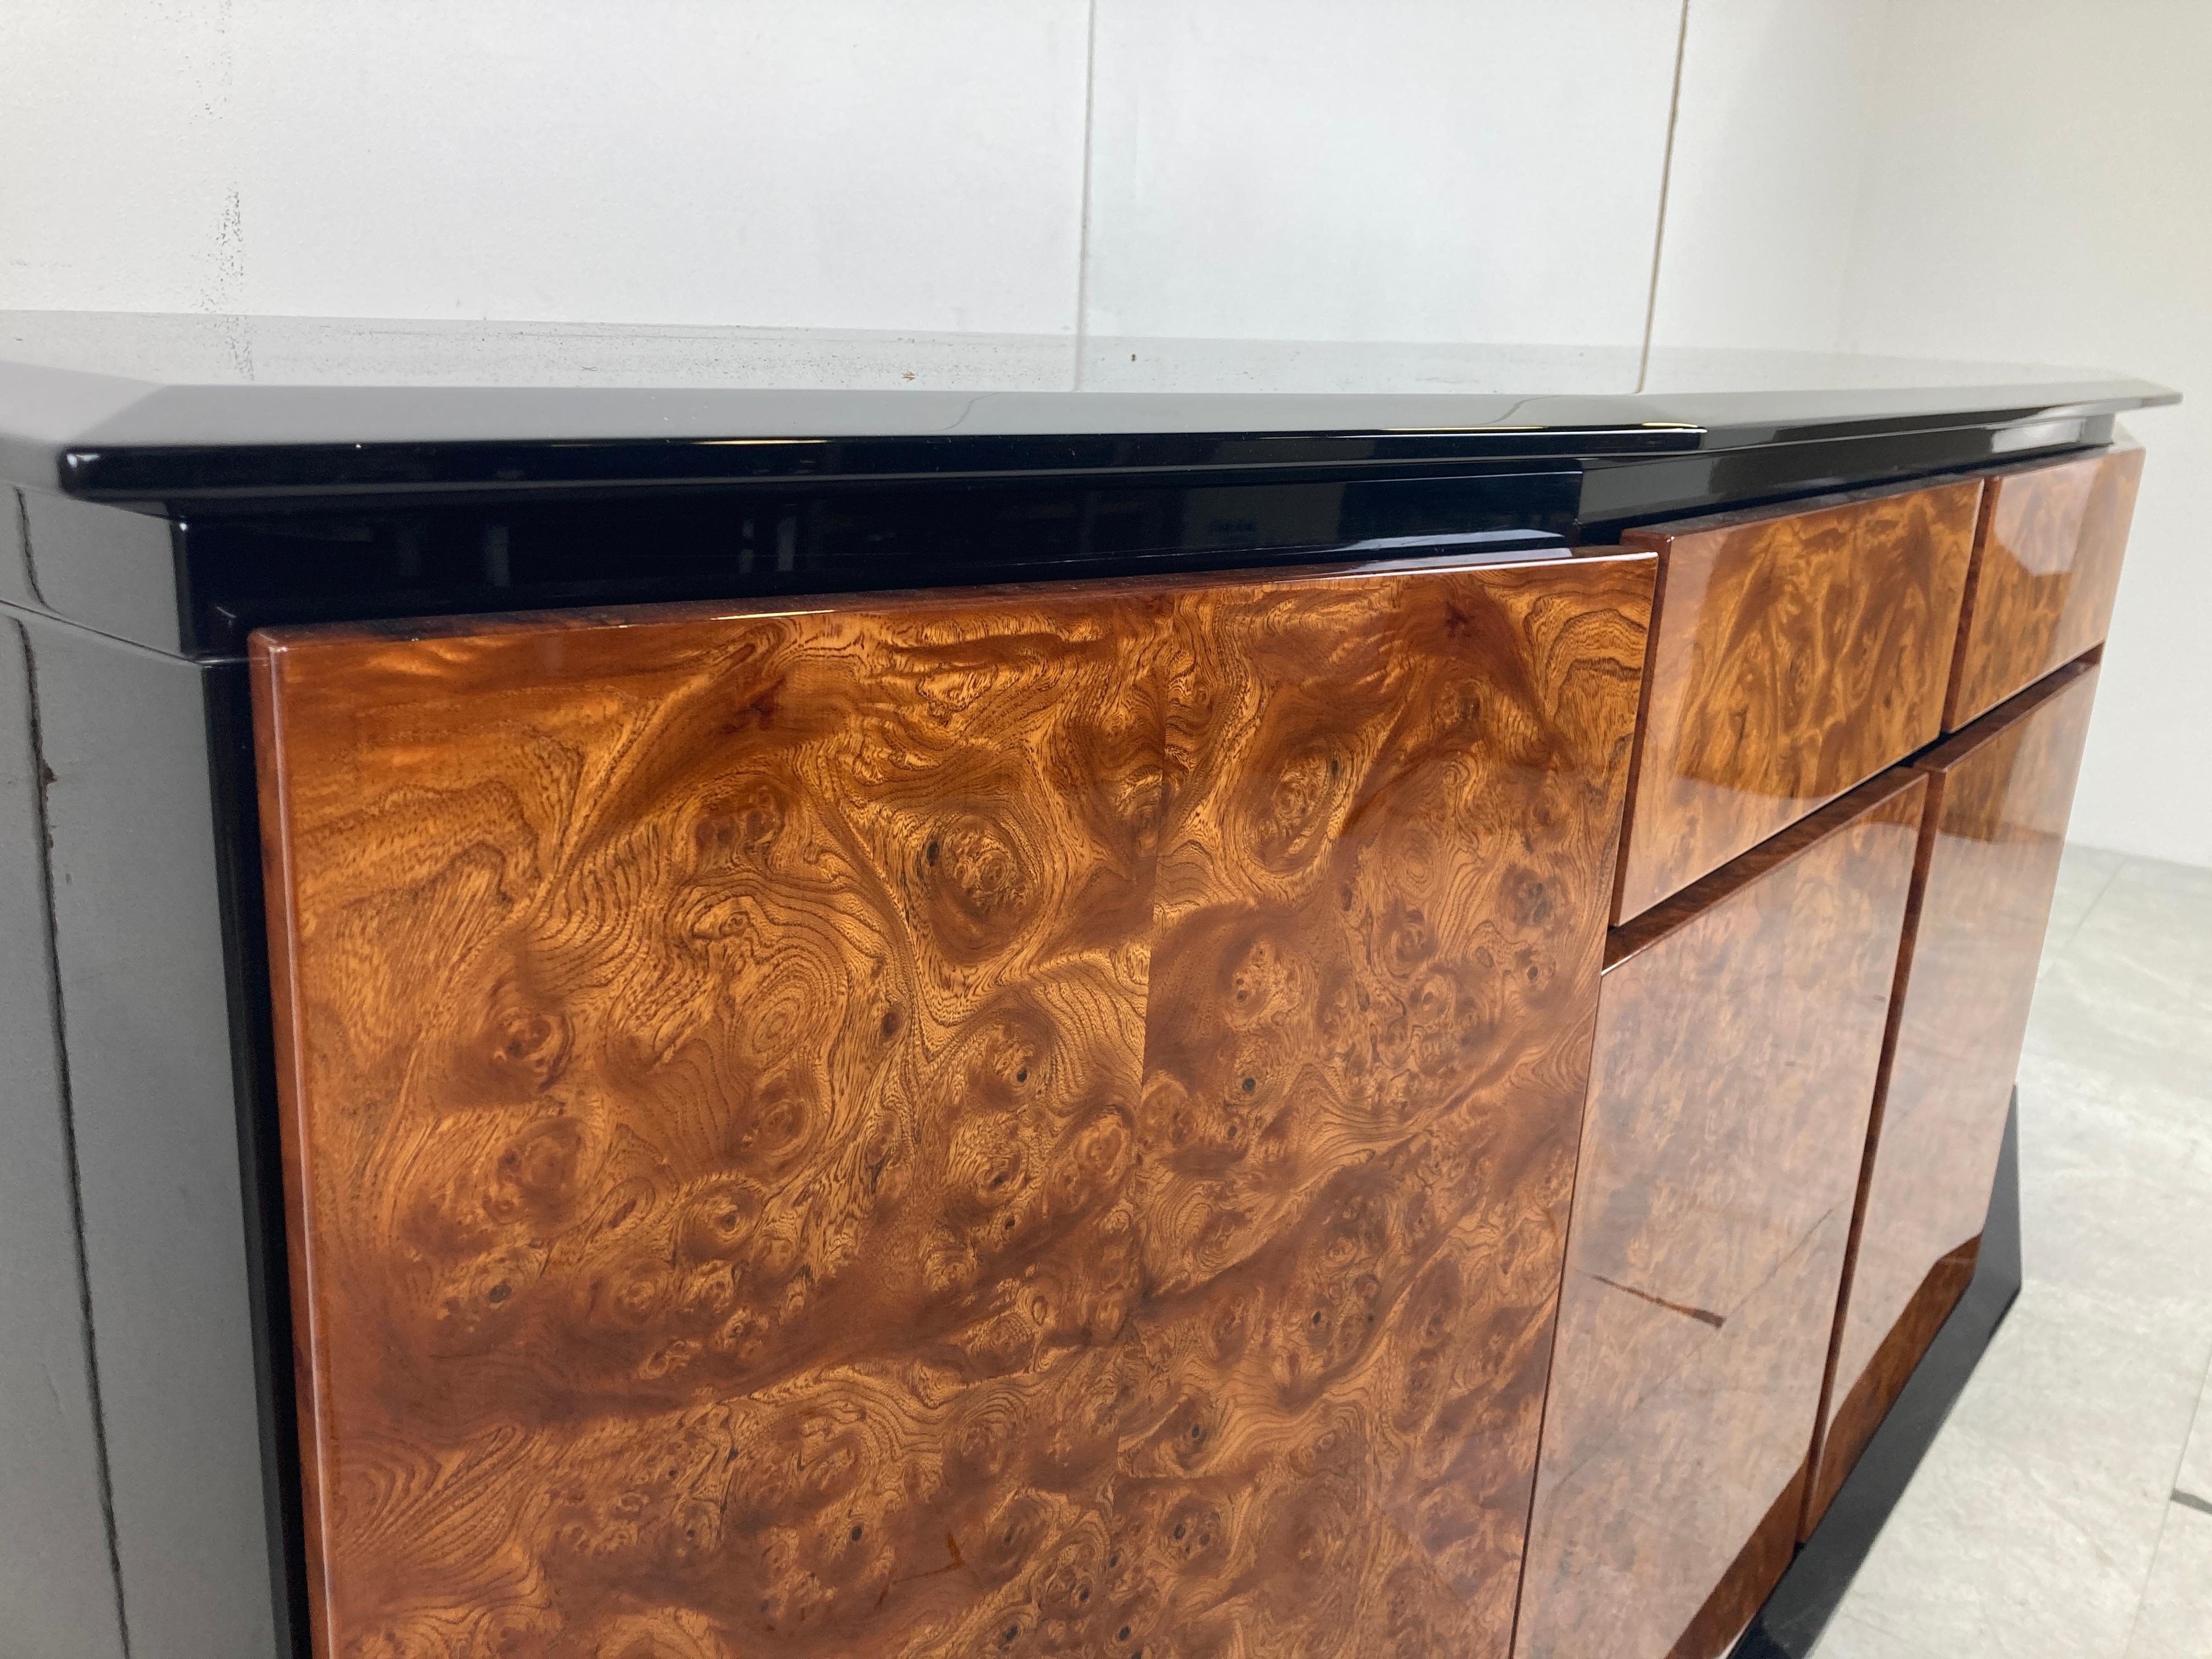 High quality burl wood sideboard/credenza.

This piece has been built with very high quality materials like beautiful burl wood veneer and black lacquered wood.

Labeled by Paul Michel.

The sideboard has 4 doors and two drawers.

Good